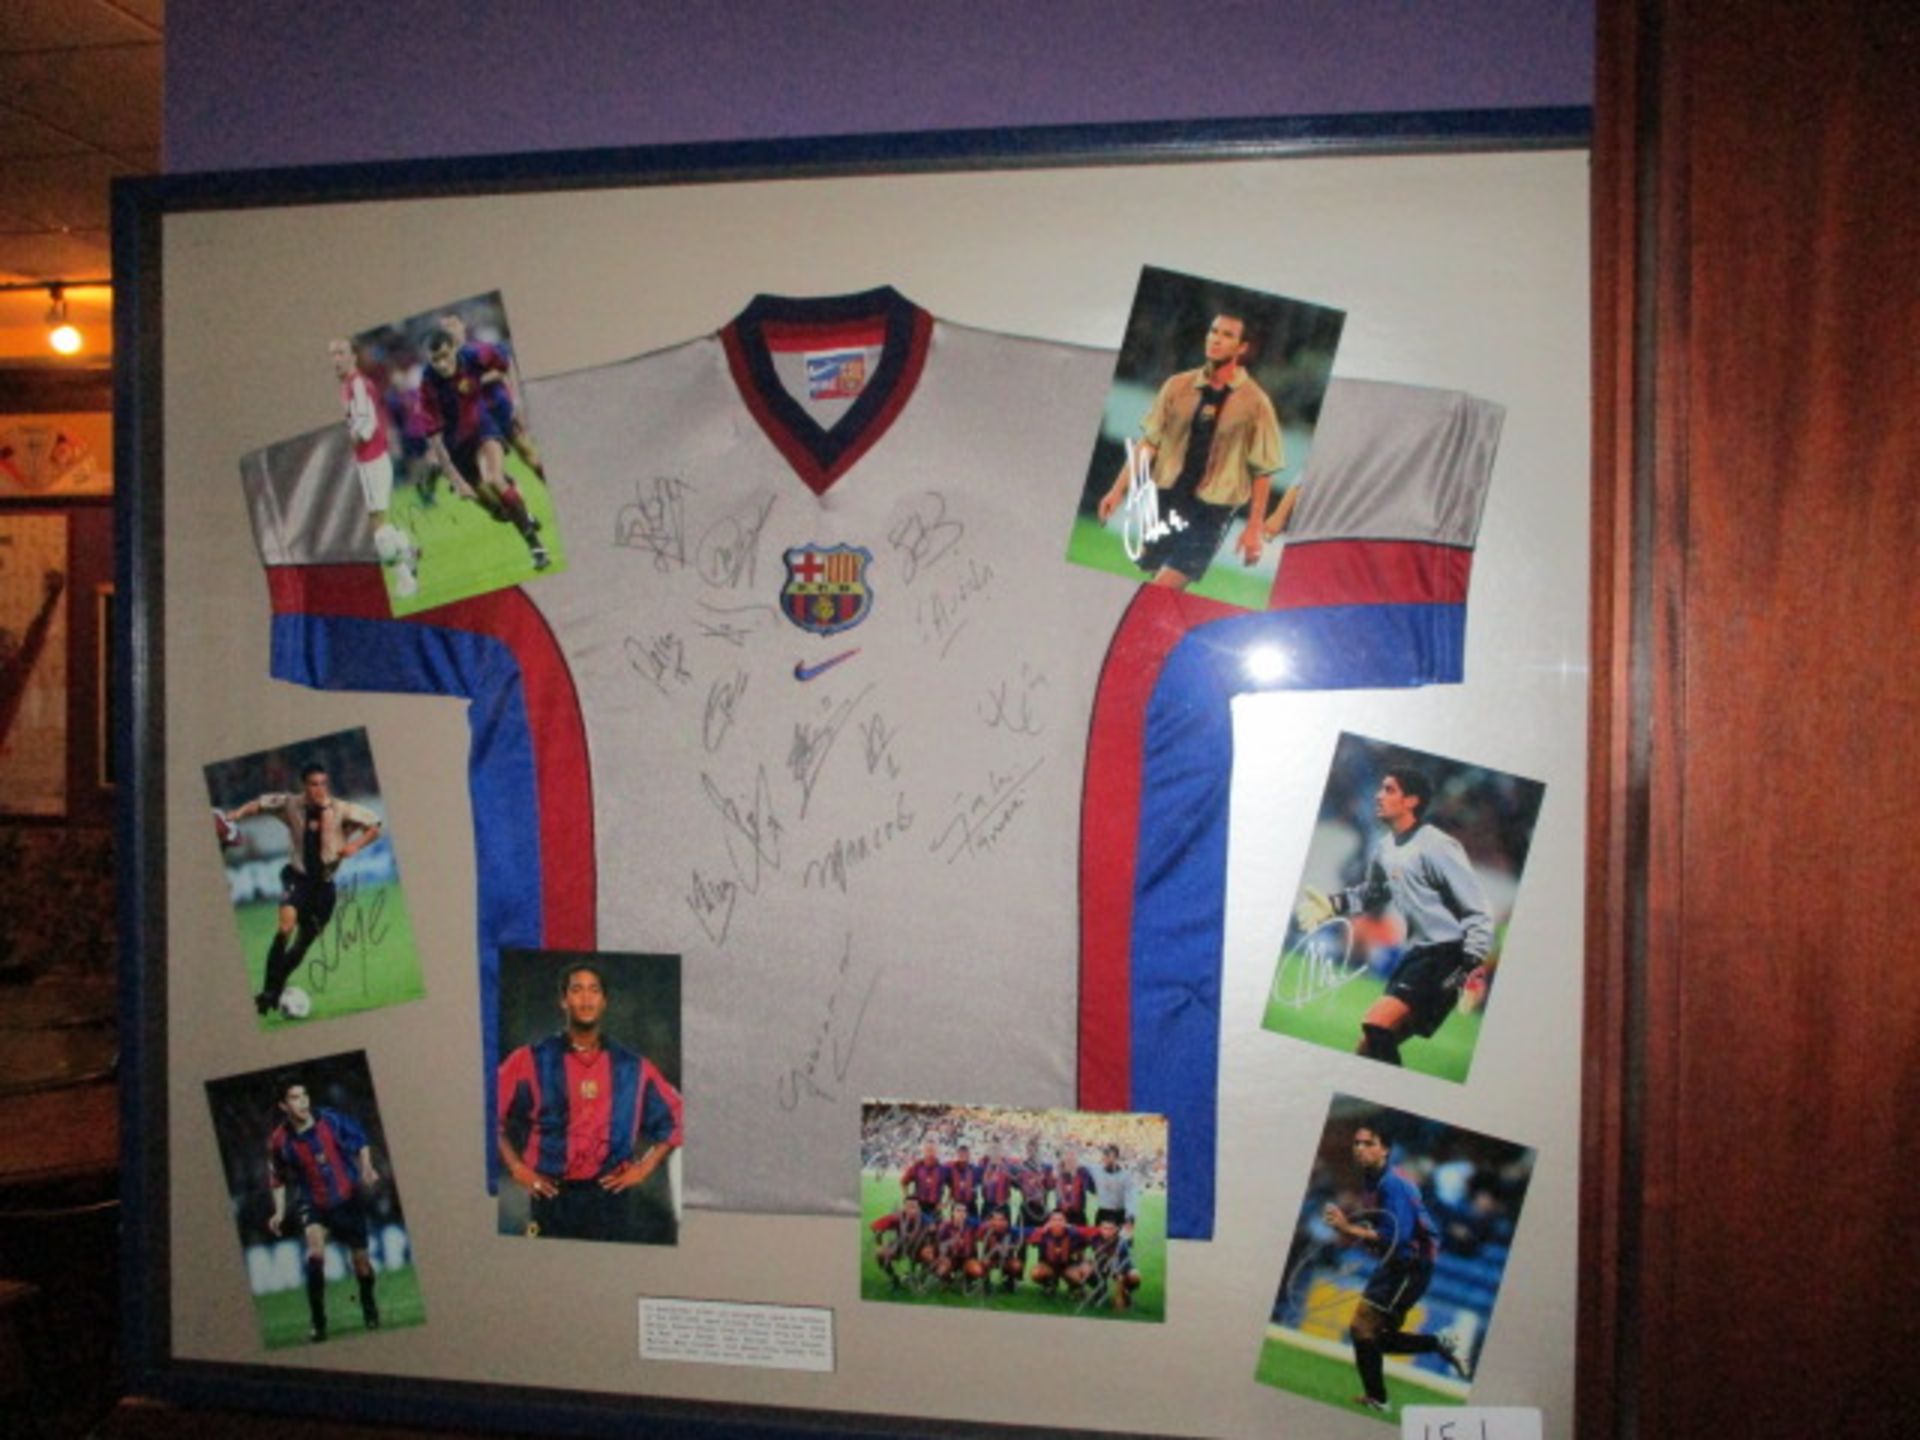 F.C. Barcelona 2001/02 signed jersey and 8 individual signed photos, 48in w x 41in hgt 15 signatures - Image 2 of 3